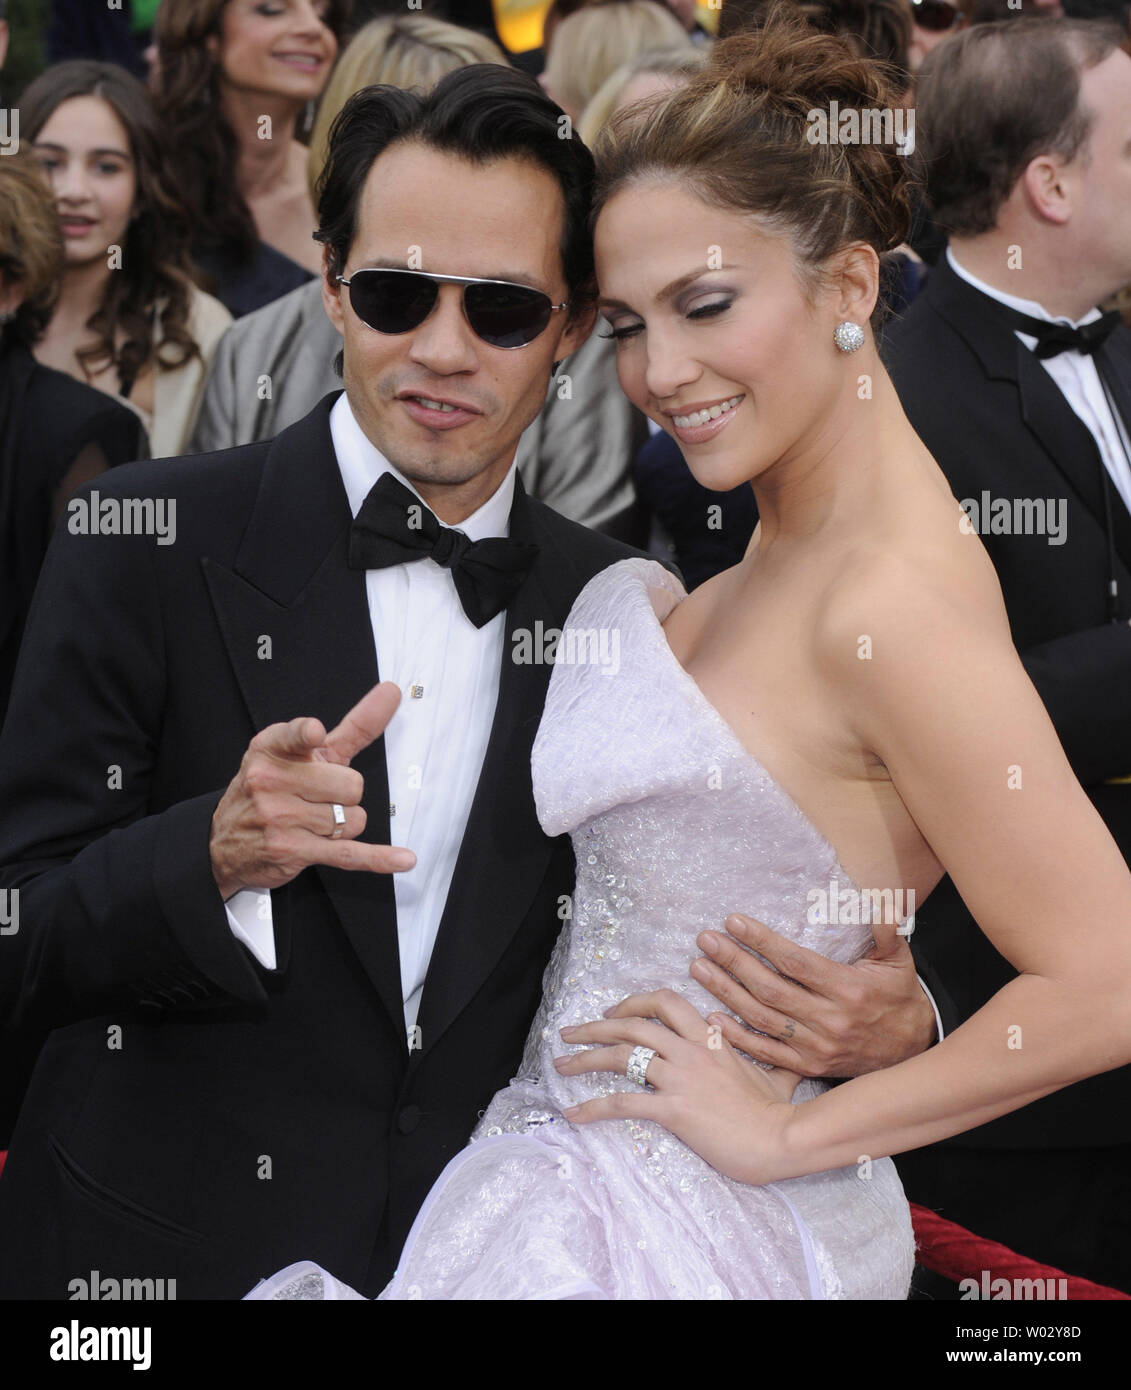 Jennifer Lopez and husband Marc Anthony arrive on the red carpet at the 82nd Academy Awards in Hollywood on March 7, 2010.   UPI/Phil McCarten Stock Photo